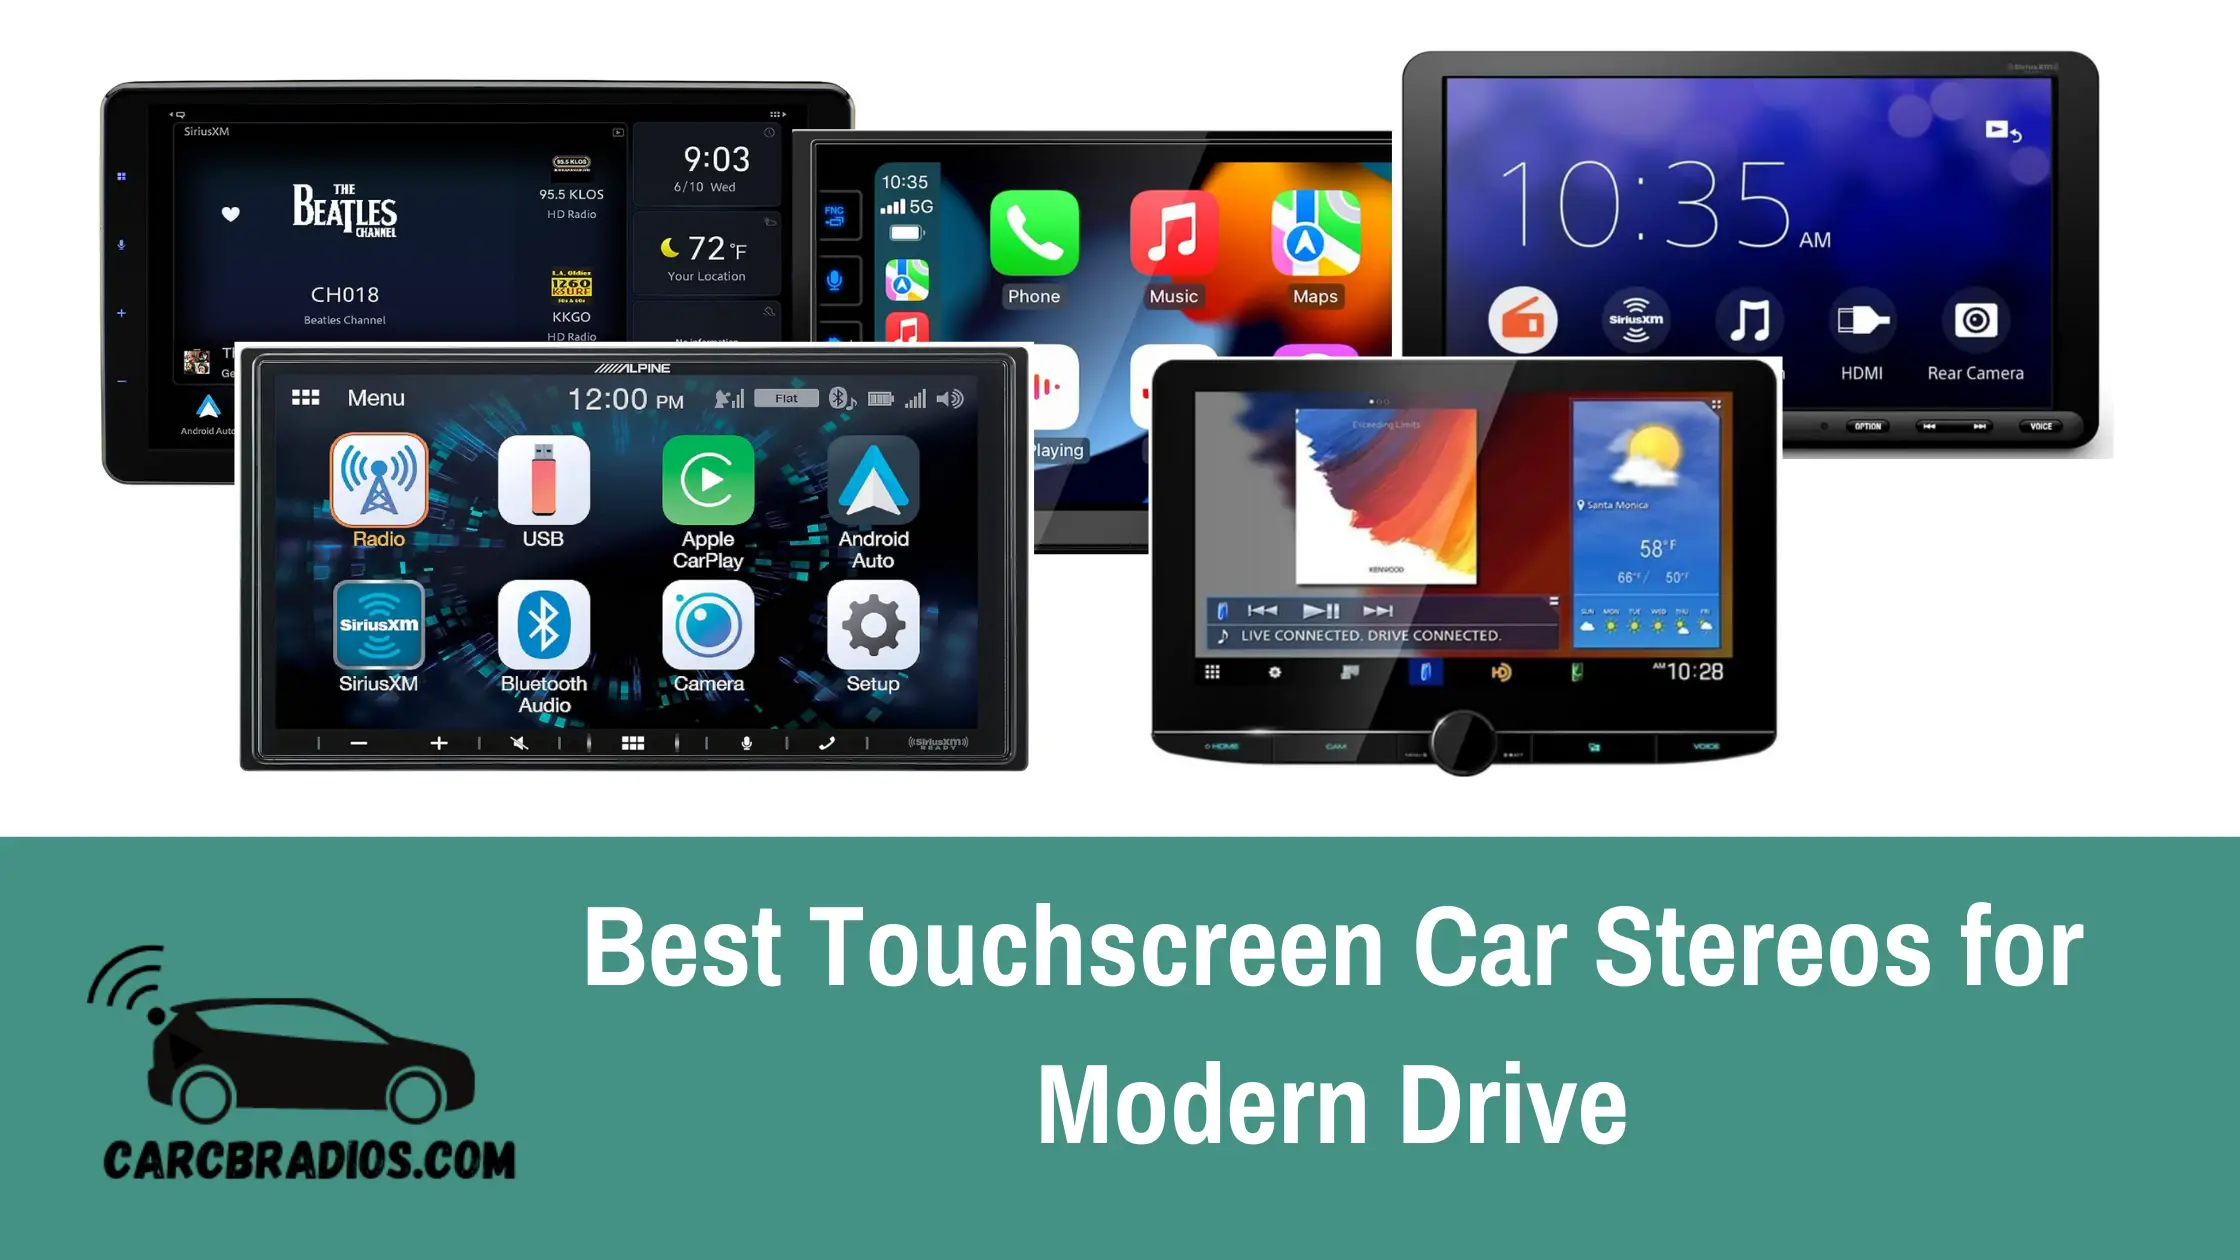 Our best touchscreen car stereo picks for 2023 have been thoroughly researched, tested, and compared against rival head units to ensure quality and reliability.